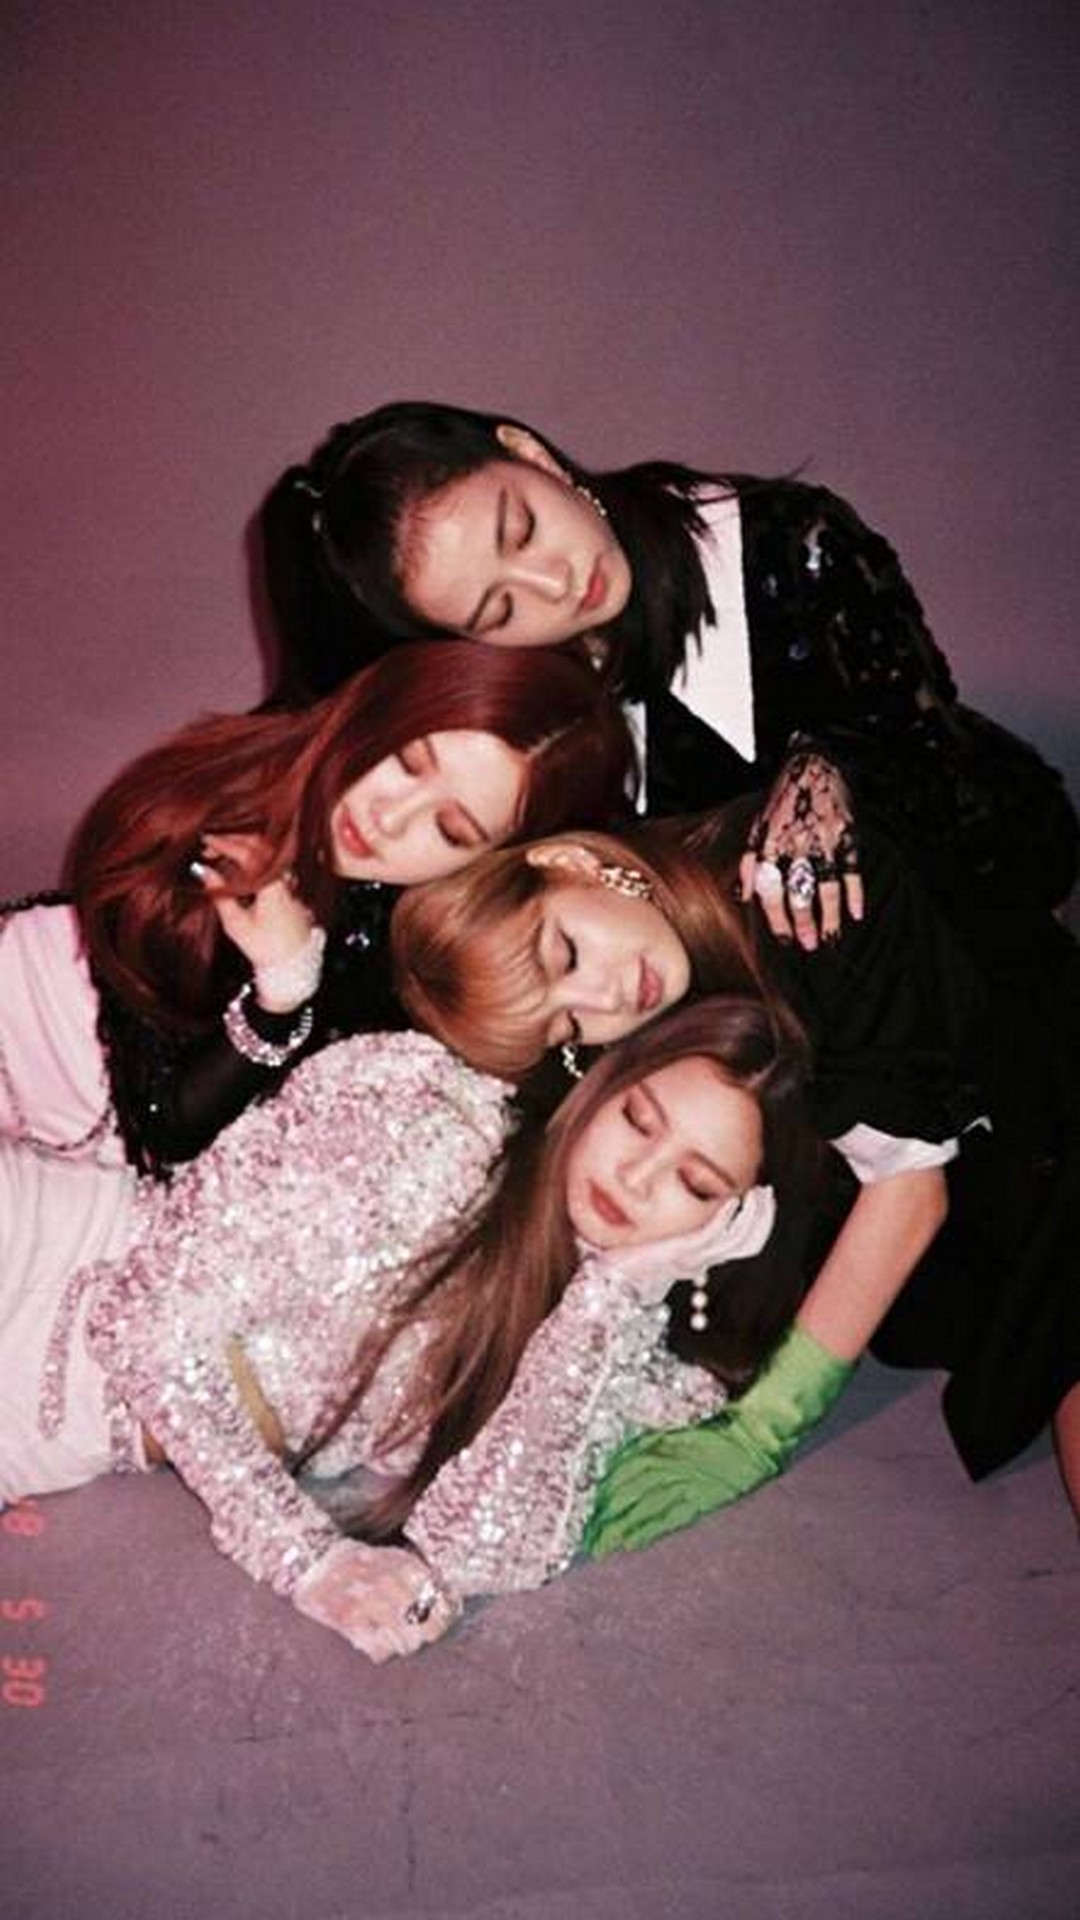 Blackpink Iphone 8 Wallpaper With High-resolution Pixel - Blackpink Wallpaper Iphone - HD Wallpaper 